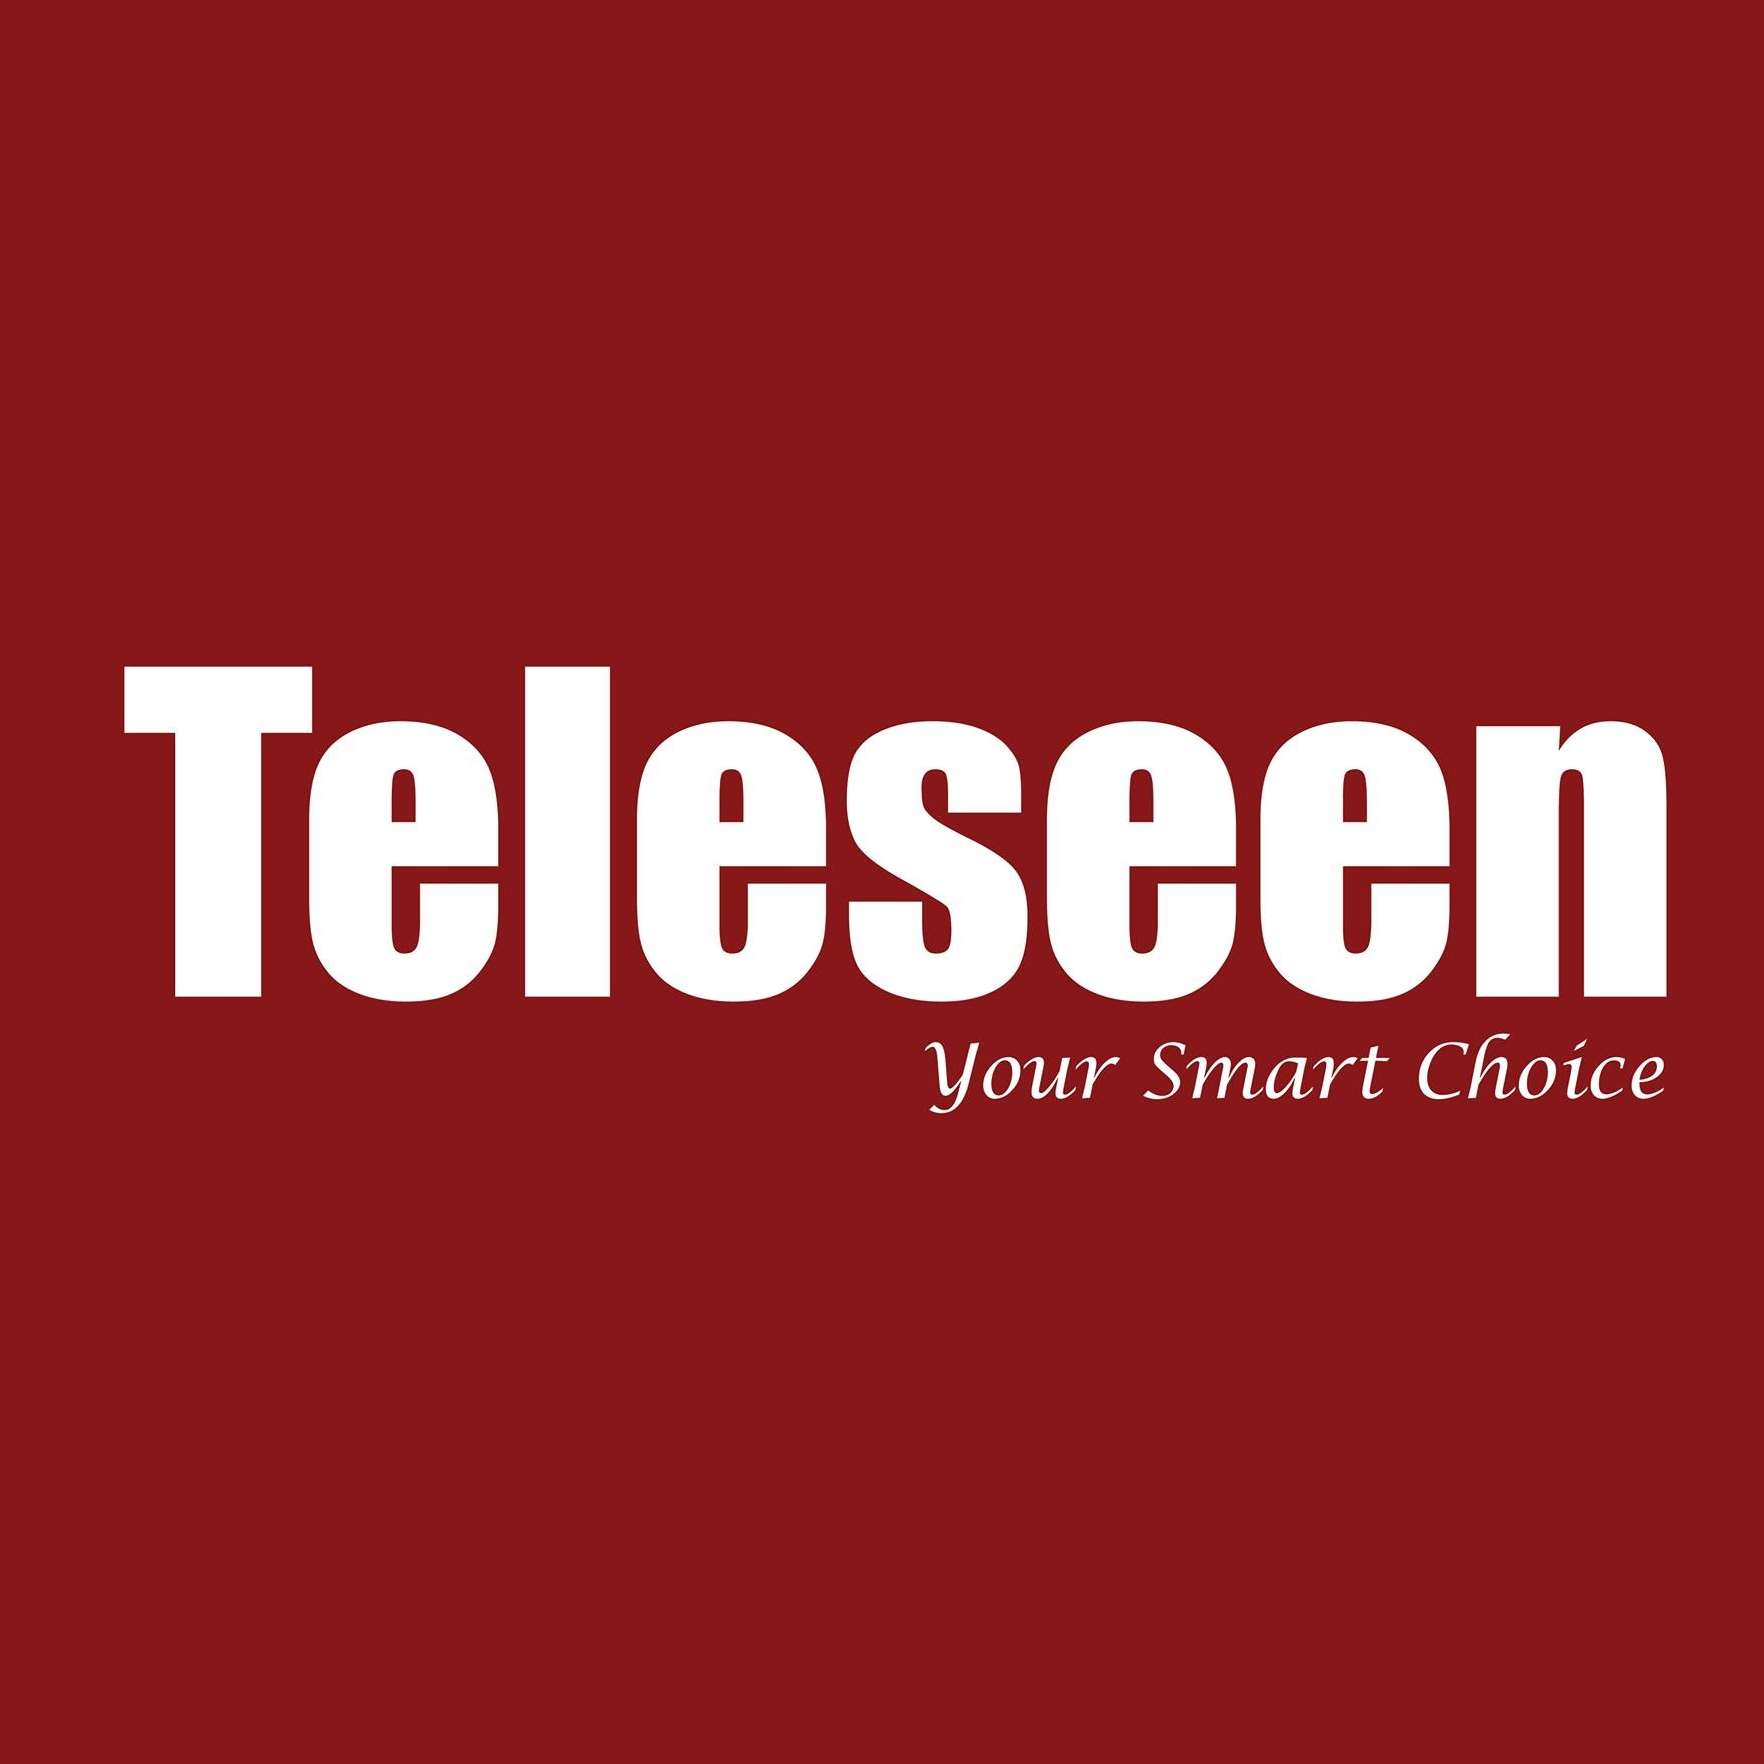 PERSONAL CARE – Teleseen